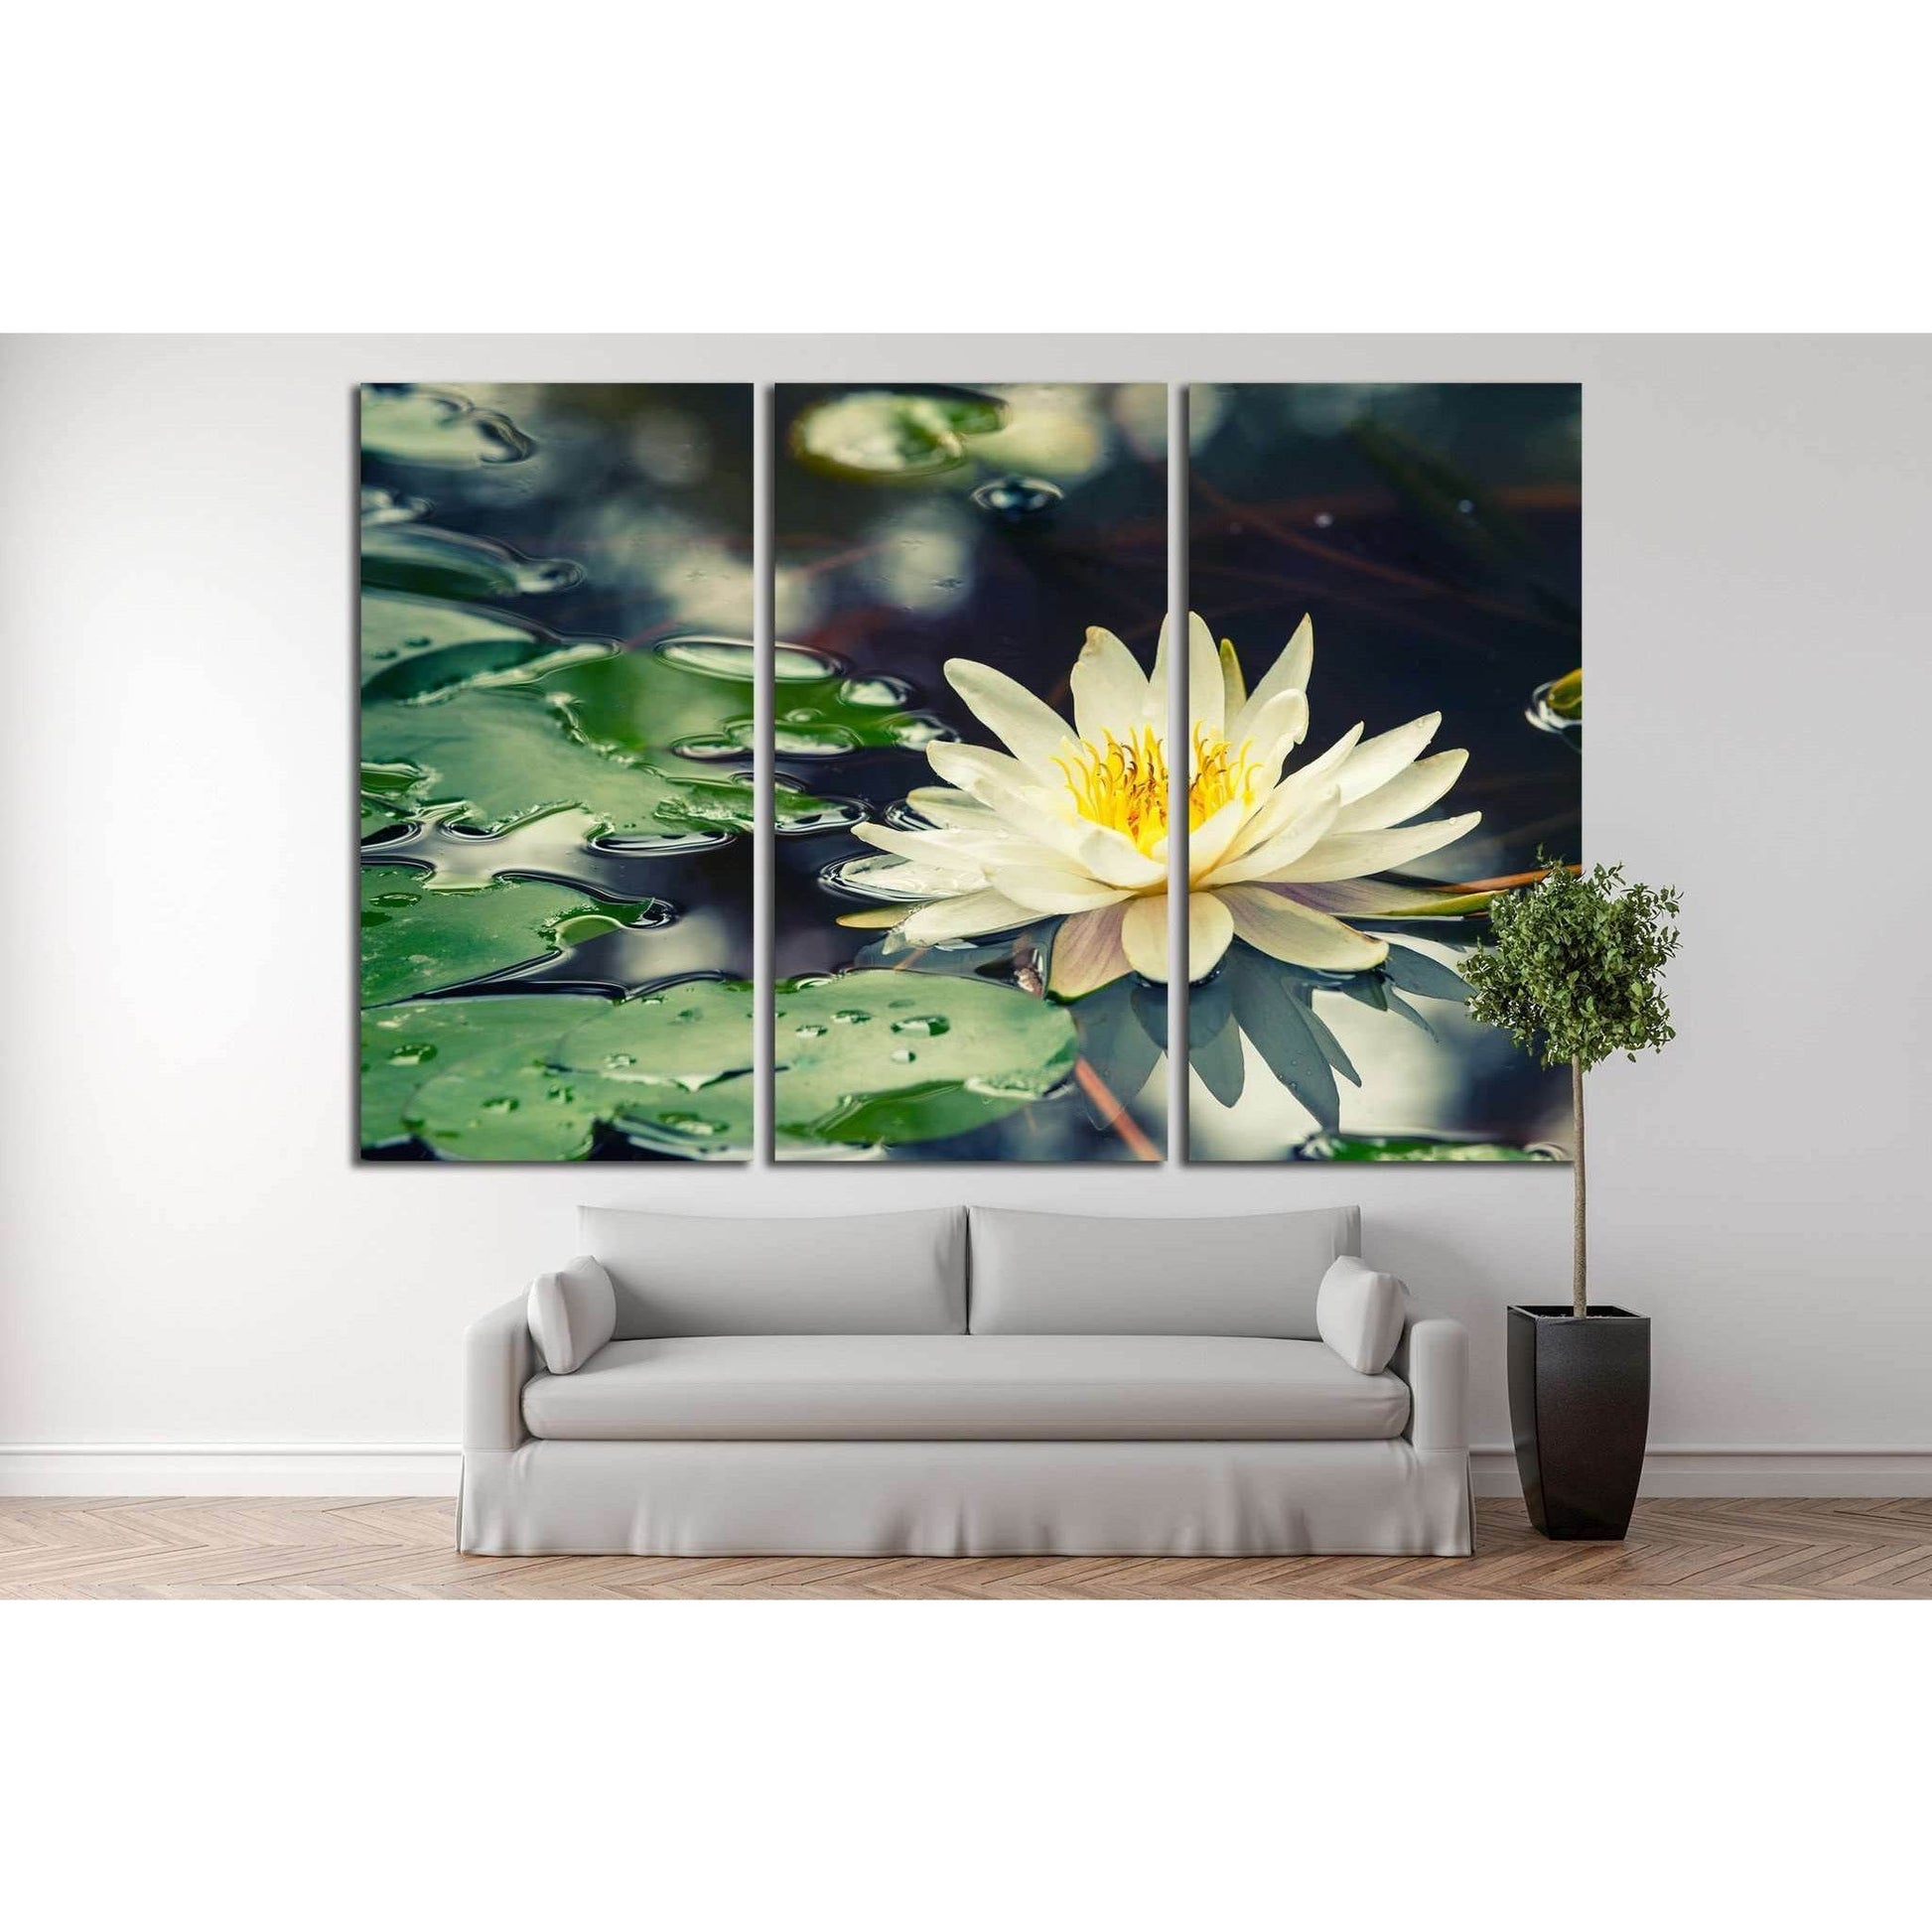 Serene Water Lily Canvas Print for Spa-Like Bathroom DecorThis canvas print depicts a serene water lily, its white and yellow bloom contrasting beautifully with the dark, reflective pond and the lush green lily pads. It's a piece that evokes tranquility a